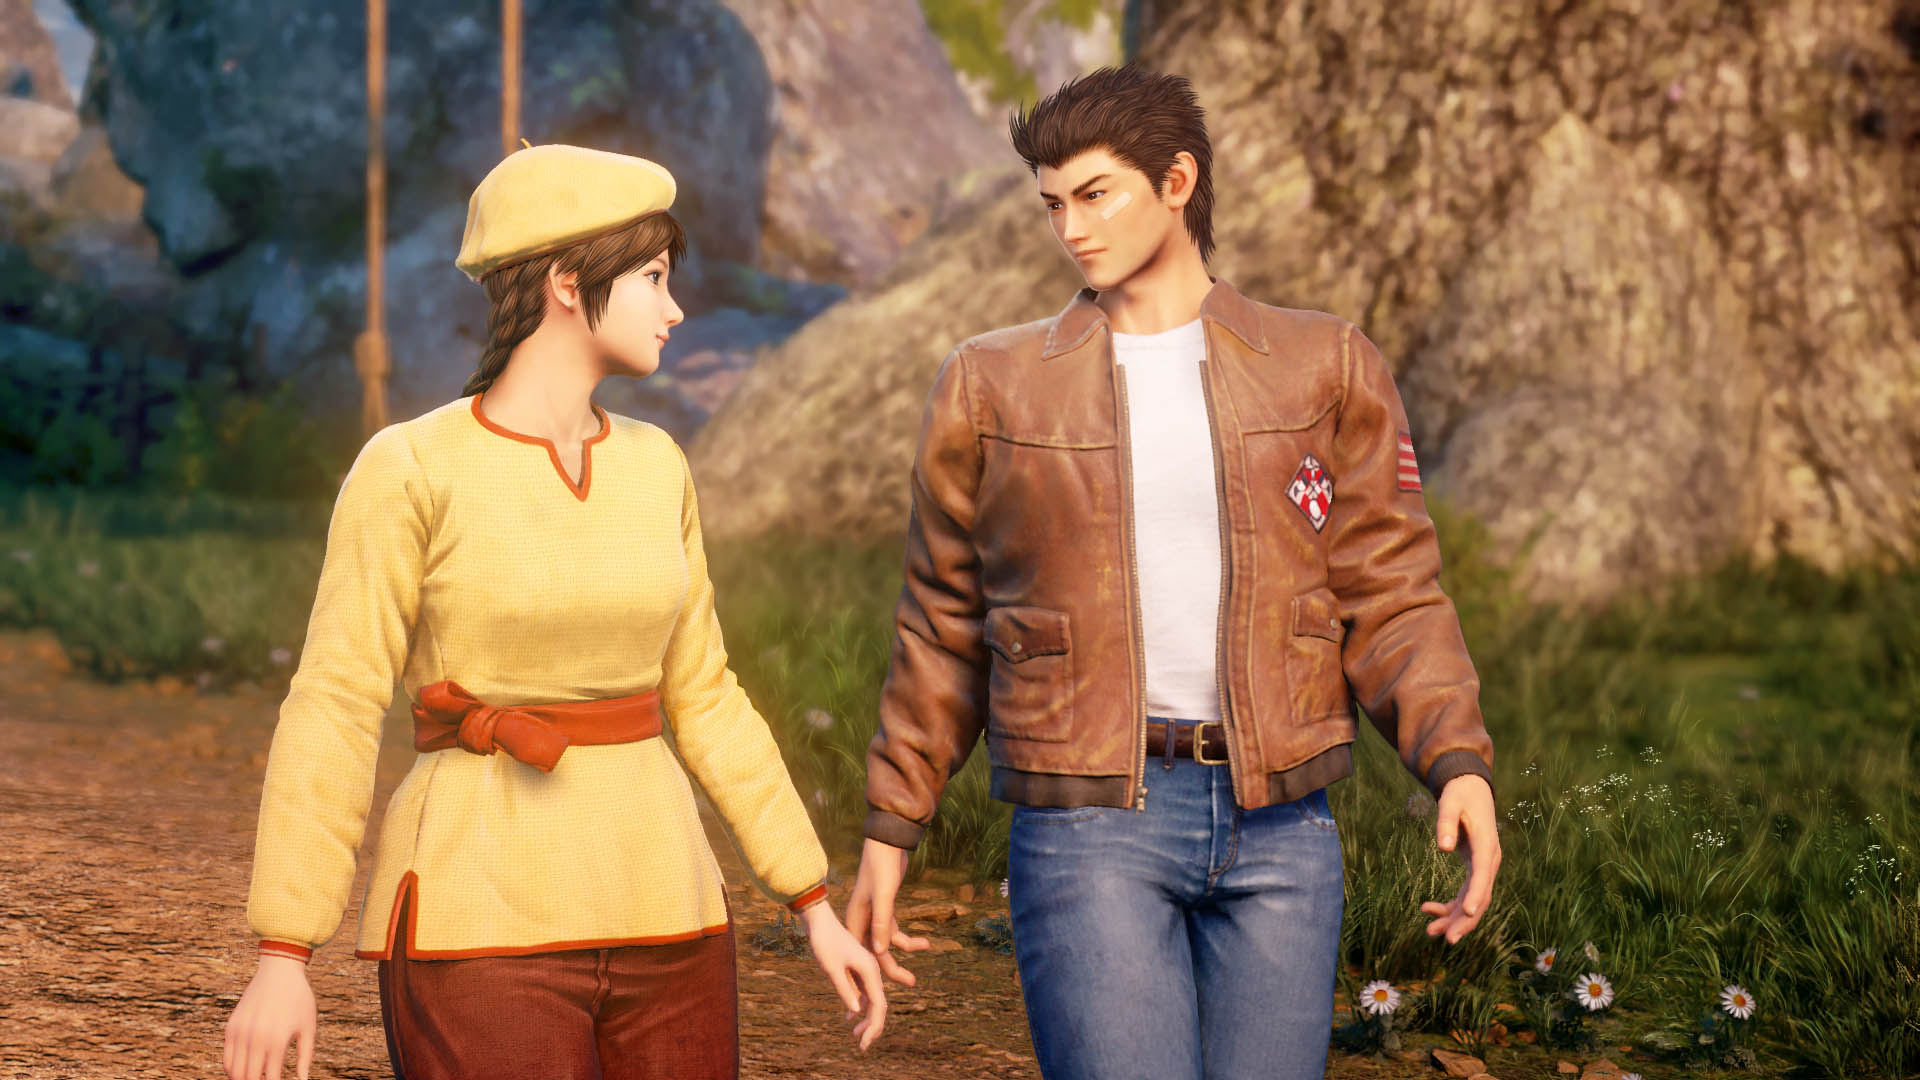 Epic's next free game is Shenmue 3